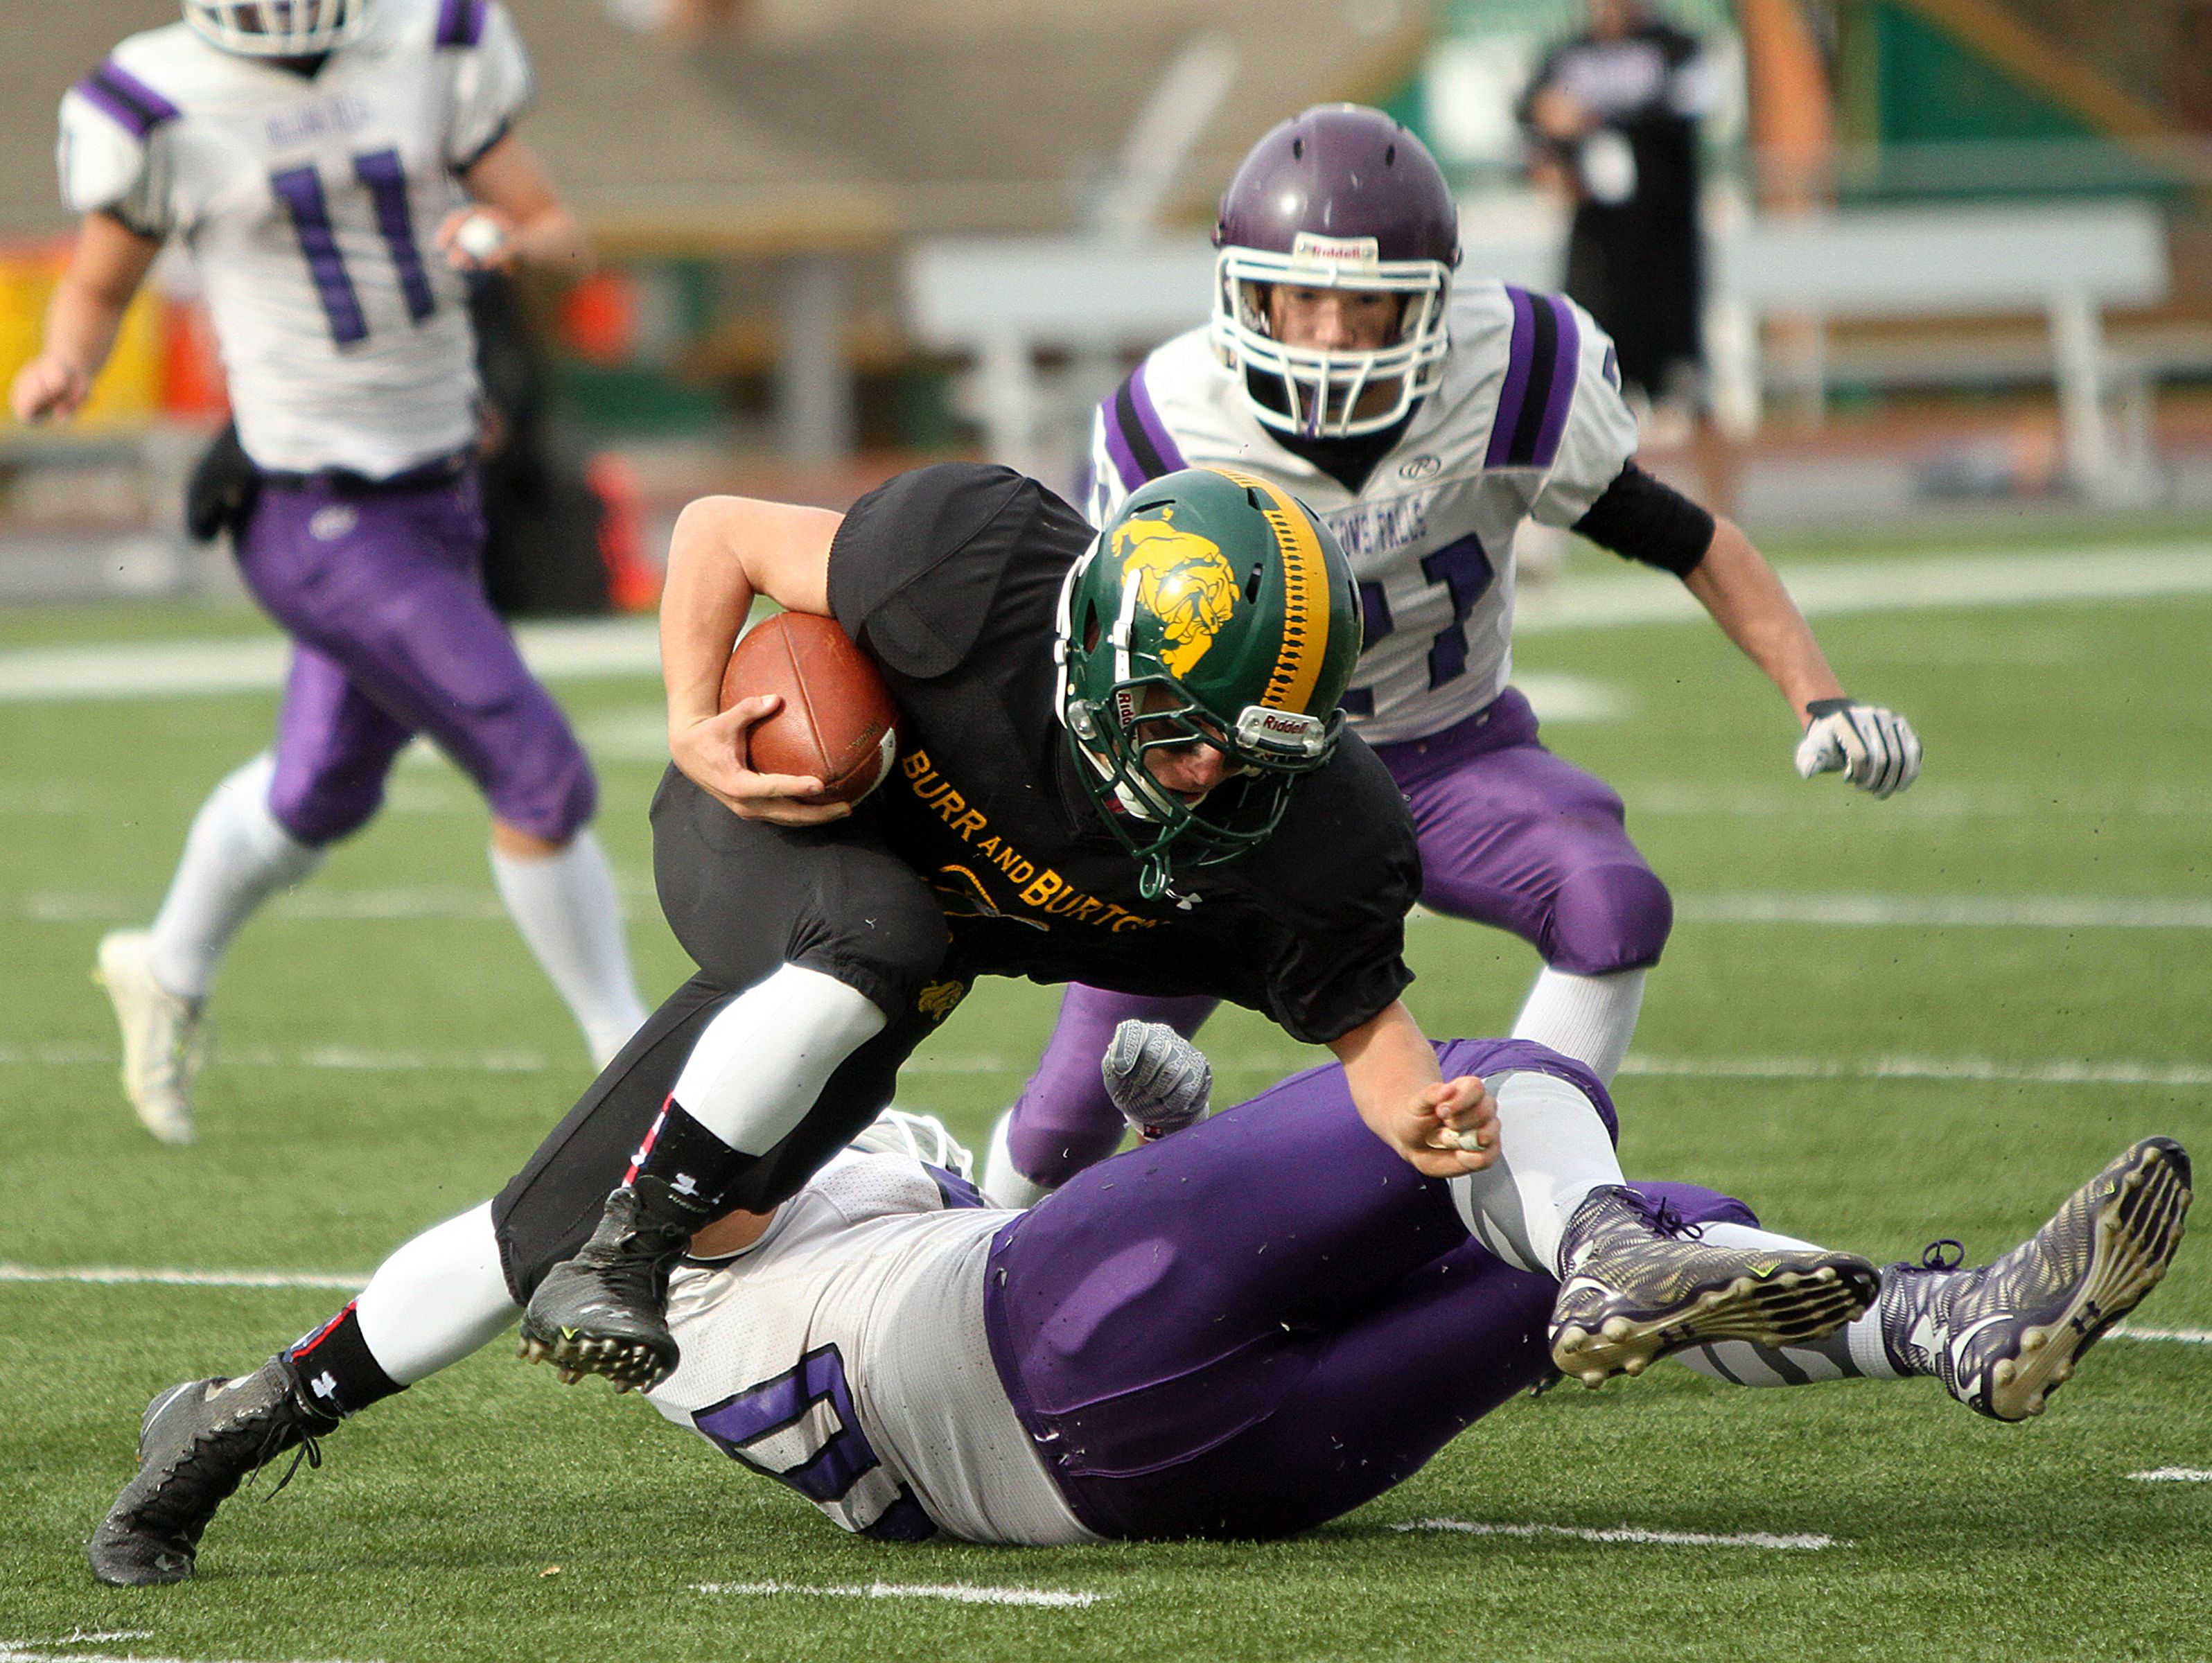 Burr and Burton's Ray Gormley is brought down by Bellows Falls' Jahyde Bullard in the second half of the Bulldogs 28-7 win over Bellows Falls in the Division II state high school football championship game on Saturday.